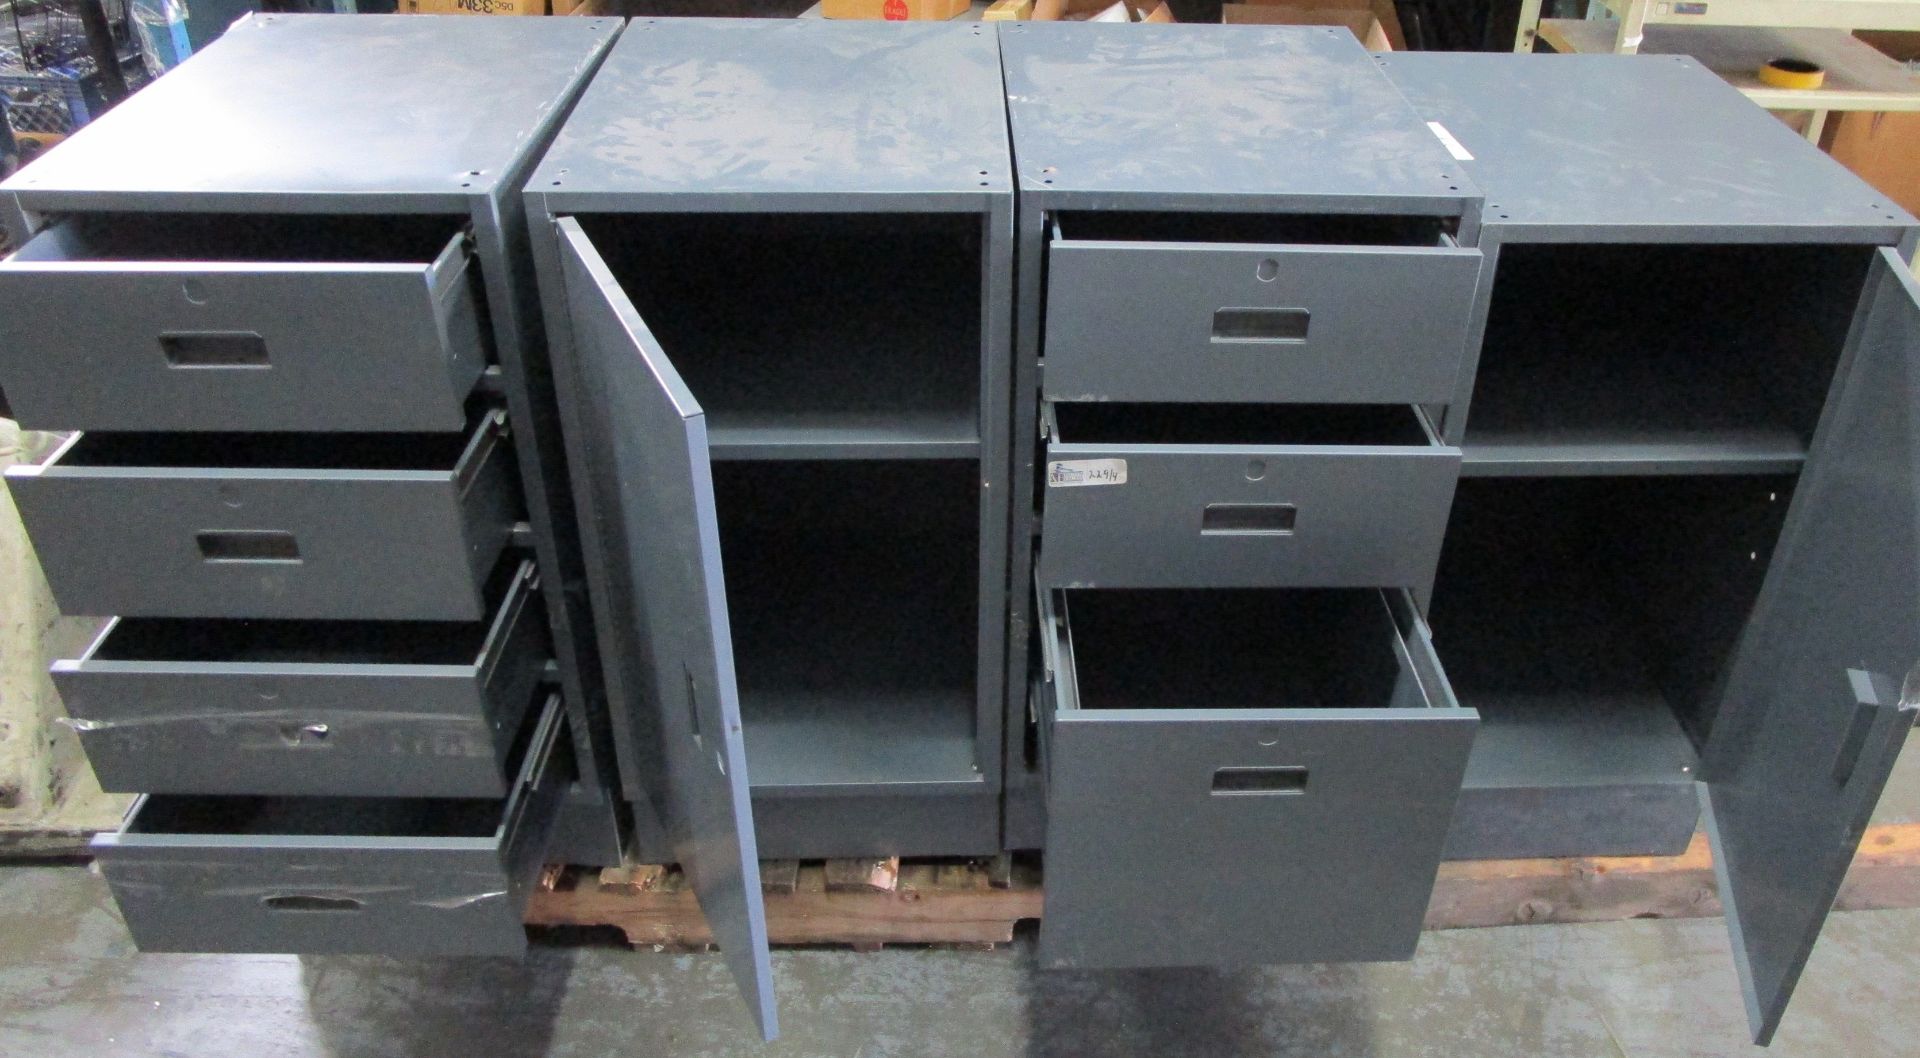 LOT OF 4 STEEL WORK BENCH CABINETS - Image 2 of 2